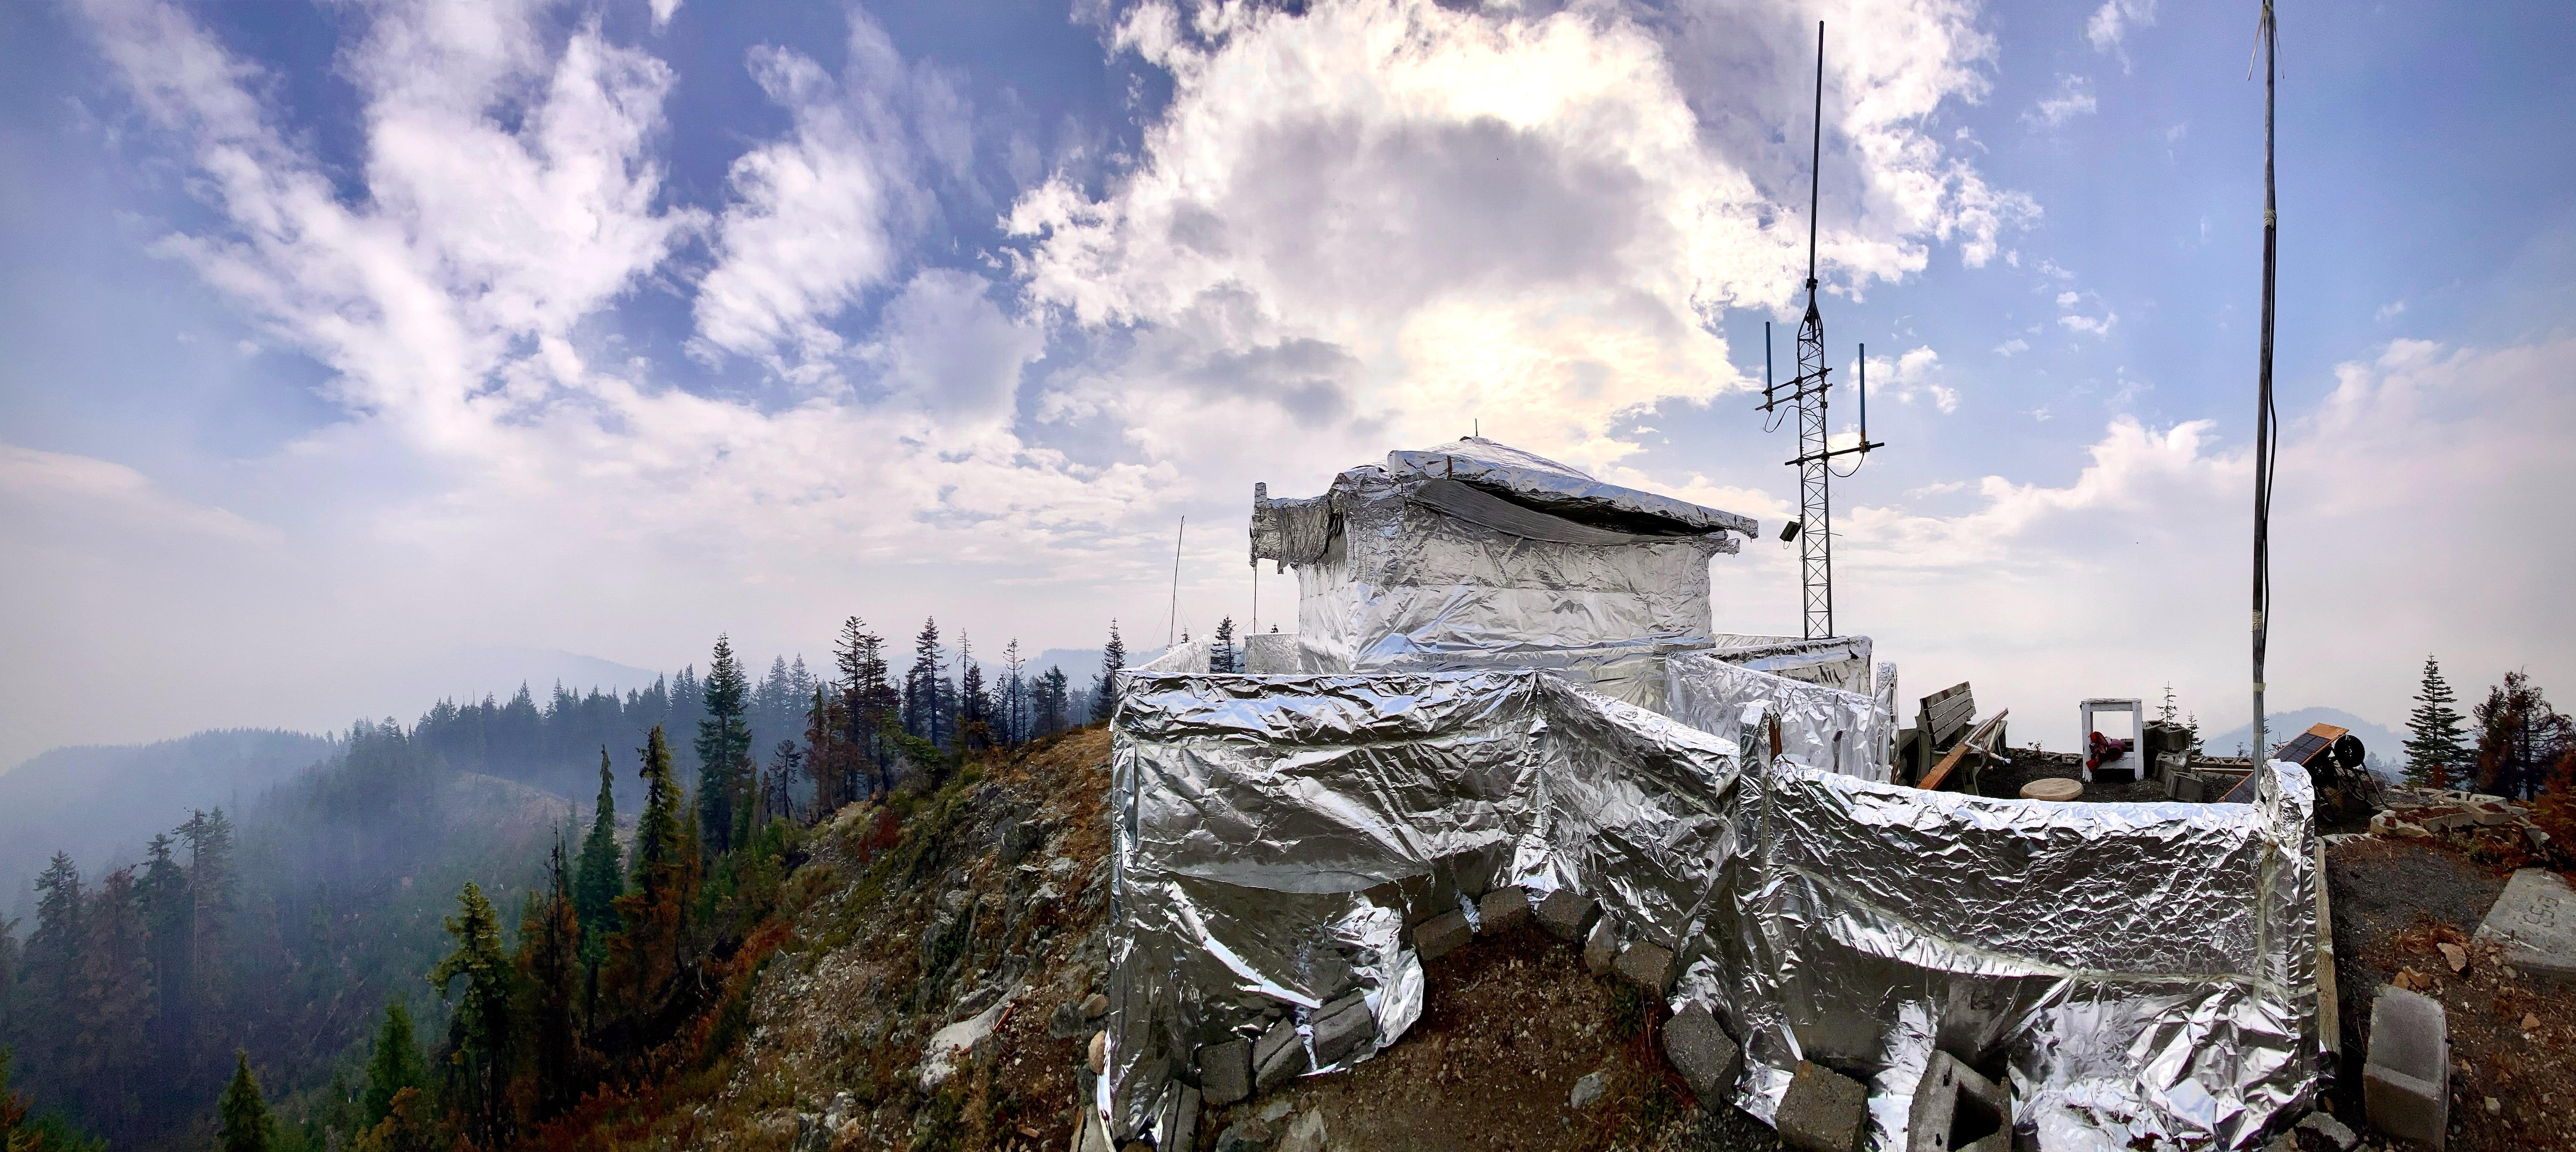 Lookout tower wrapped in protective wrap 